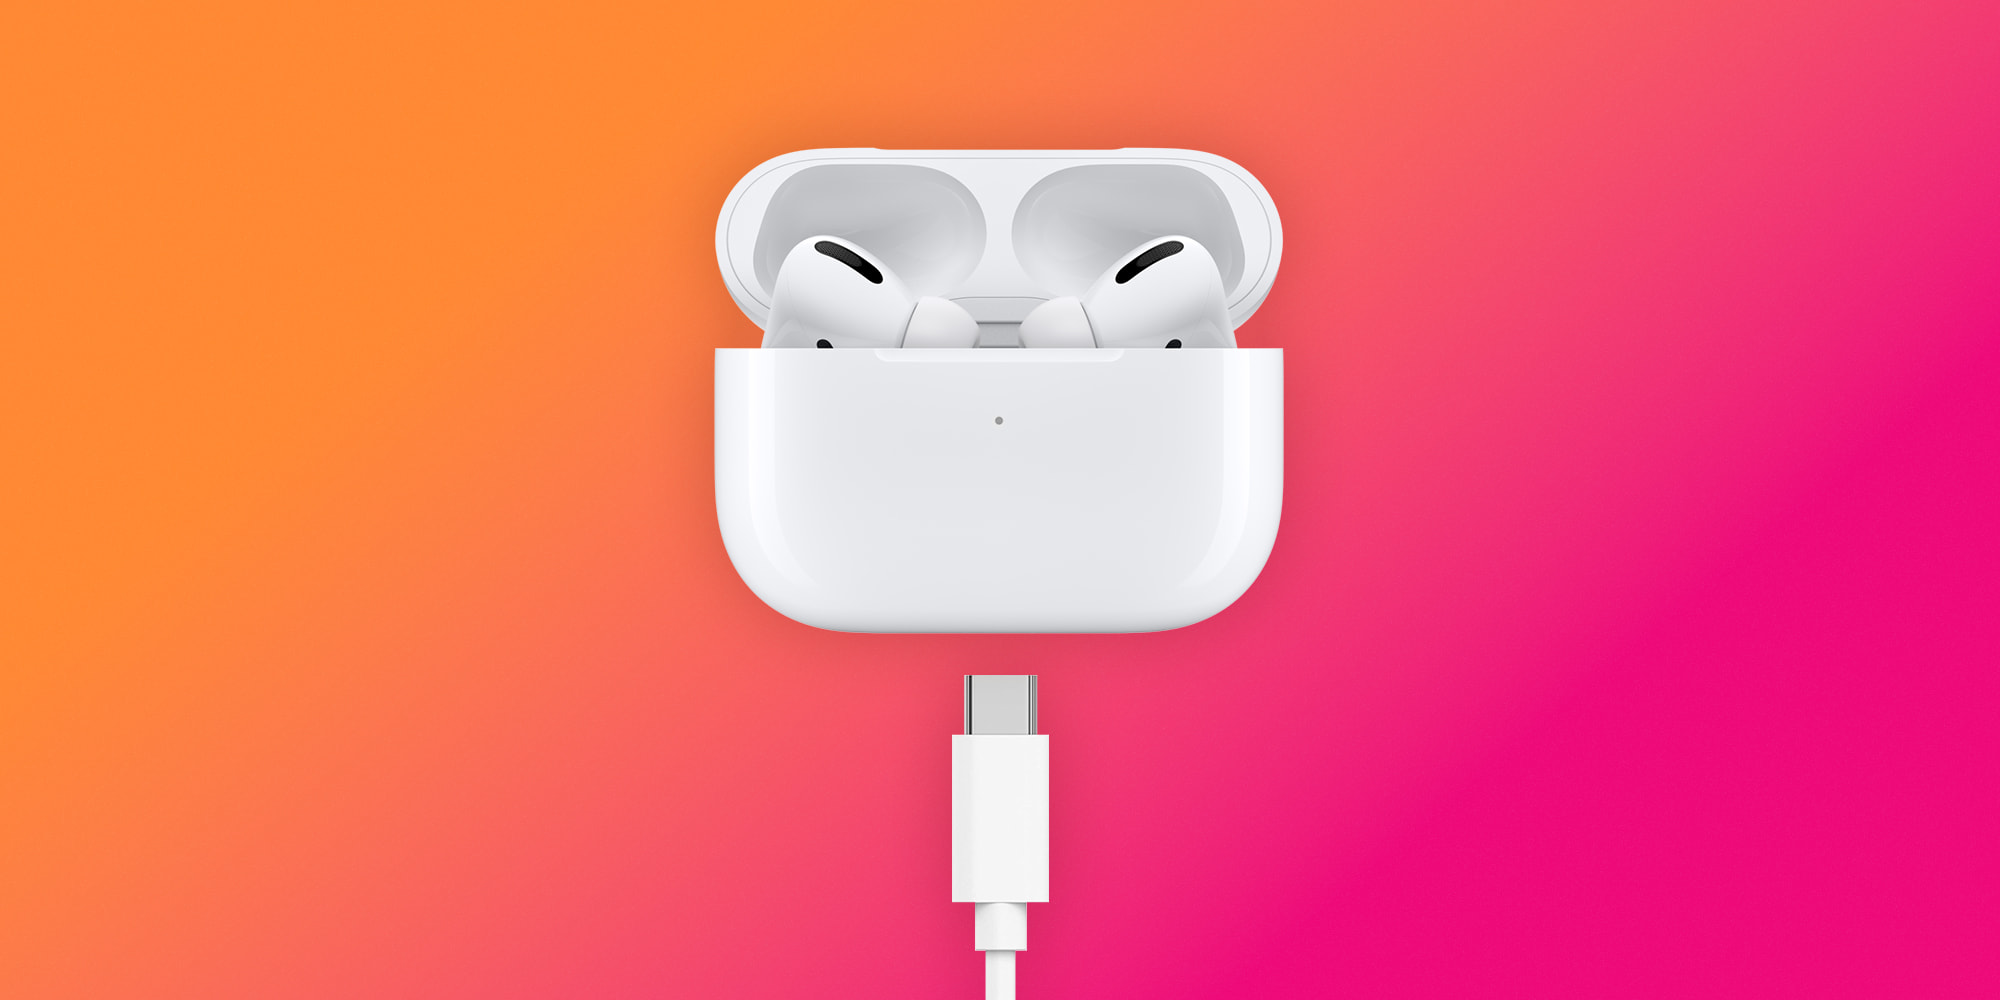 USB-C versions of AirPods and AirPods Max might not be available